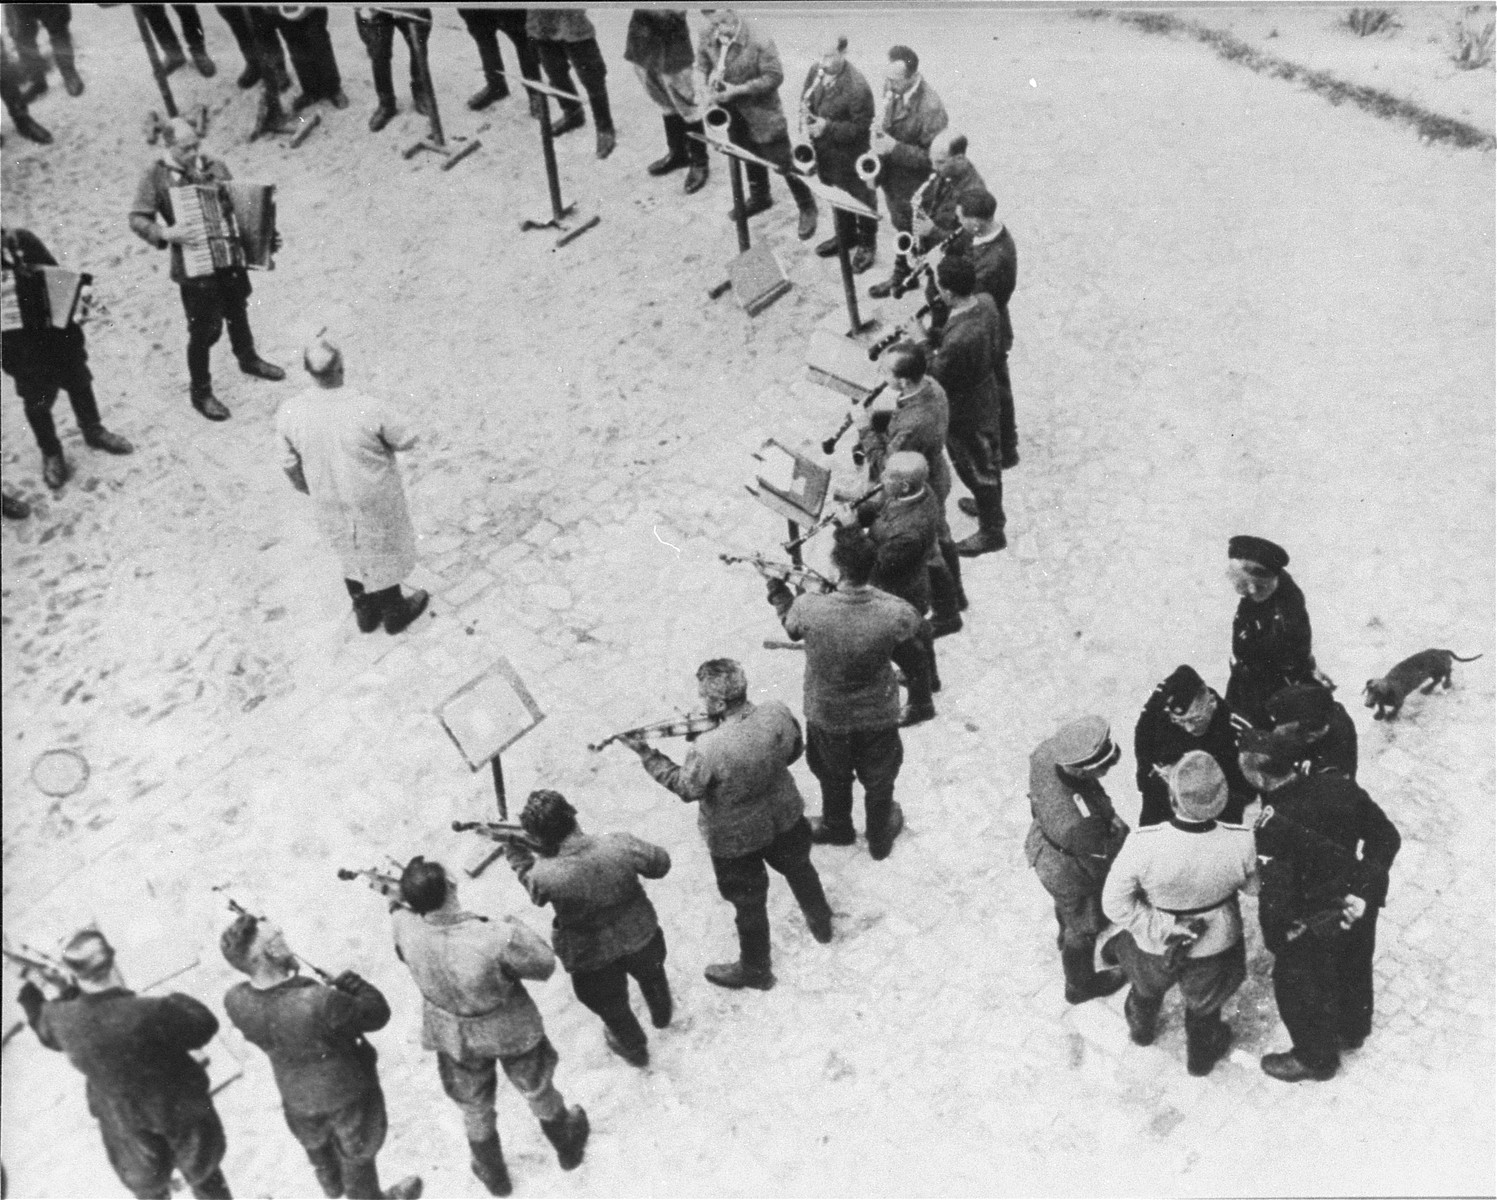 Members of the orchestra at the Janowska concentration camp perform while standing in a circle around the conductor, Yacub Mund,  in the Appelplatz [roll call area].  

Pictured at the right, in the light uniform, is camp commandant SS Haupsturmfuehrer Fritz Gebauer.  The taller officer is camp commander SS Obersturmfuehrer Gustav Wilhaus with his dachshund.

The Janowska orchestra included some of the leading Jewish musicians in Lvov, among them violinist Leonid Stricks and cellist Leon Eber.  The SS forced the orchestra to perform during selections and actions and even "commissioned" a special composition to be played on these occasions.  Entitled "Todestango" [Tango of Death], the piece was composed by Yakub Munt (sp?), former director of the Lvov opera.  The music was based on an earlier work by Eduardo Bianco.  The members of the orchestra met their end in 1943 when they were shot to death by their overseers while playing their instruments.